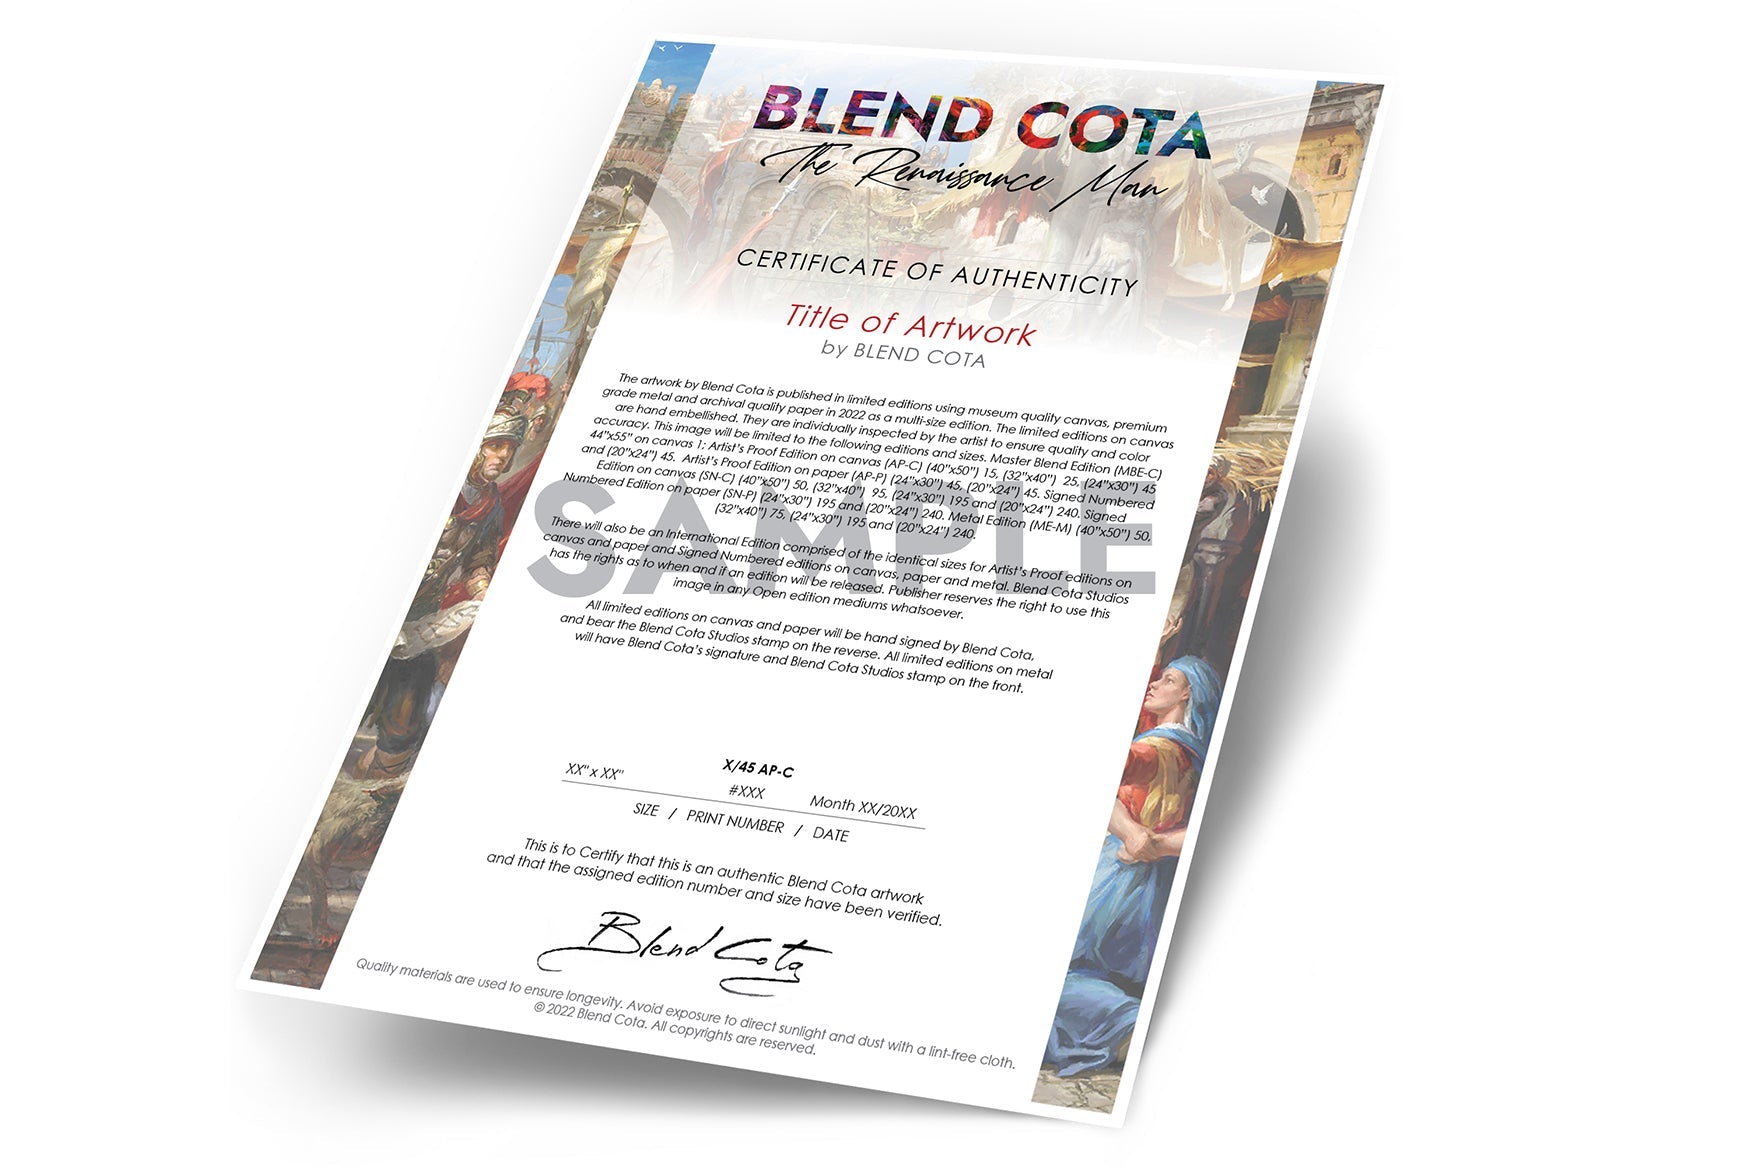 
                  
                    The Last Supper - Blend Cota Limited Edition Art on Metal - Blend Cota Studios - Certificate of authenticity
                  
                